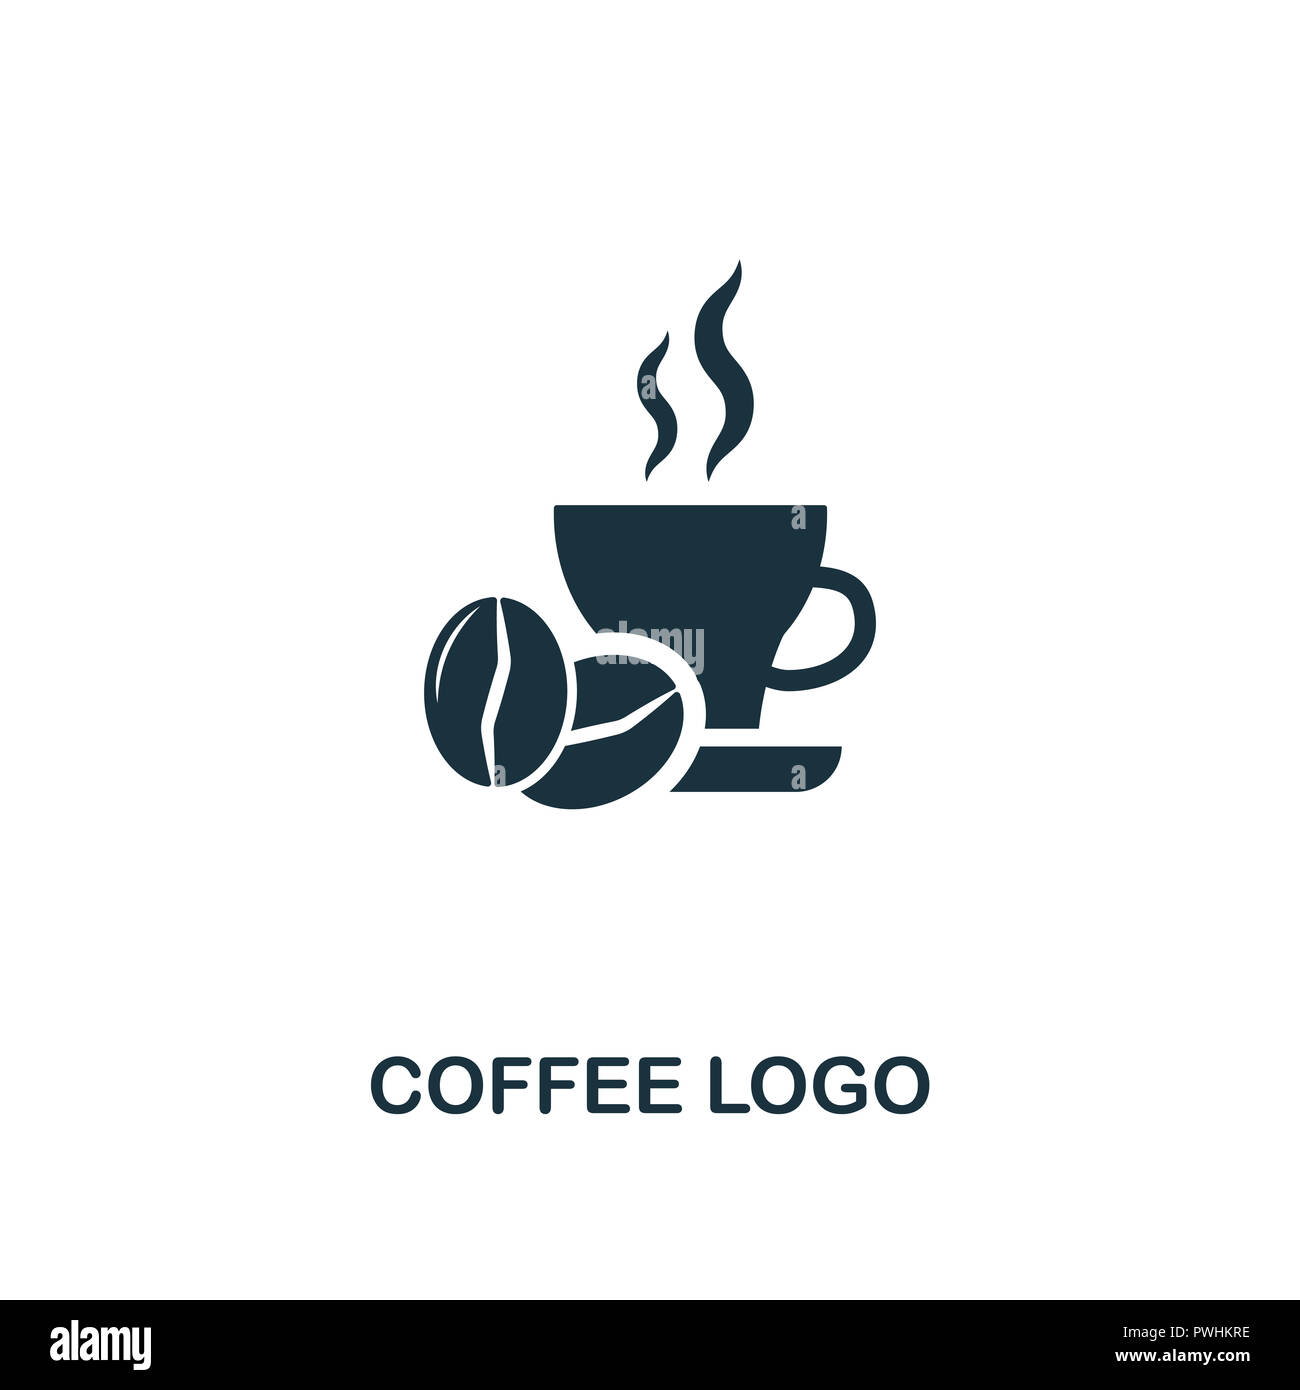 https://c8.alamy.com/comp/PWHKRE/coffee-logo-icon-premium-style-design-from-coffe-shop-collection-ux-and-ui-pixel-perfect-coffee-logo-icon-for-web-design-apps-software-printing-PWHKRE.jpg